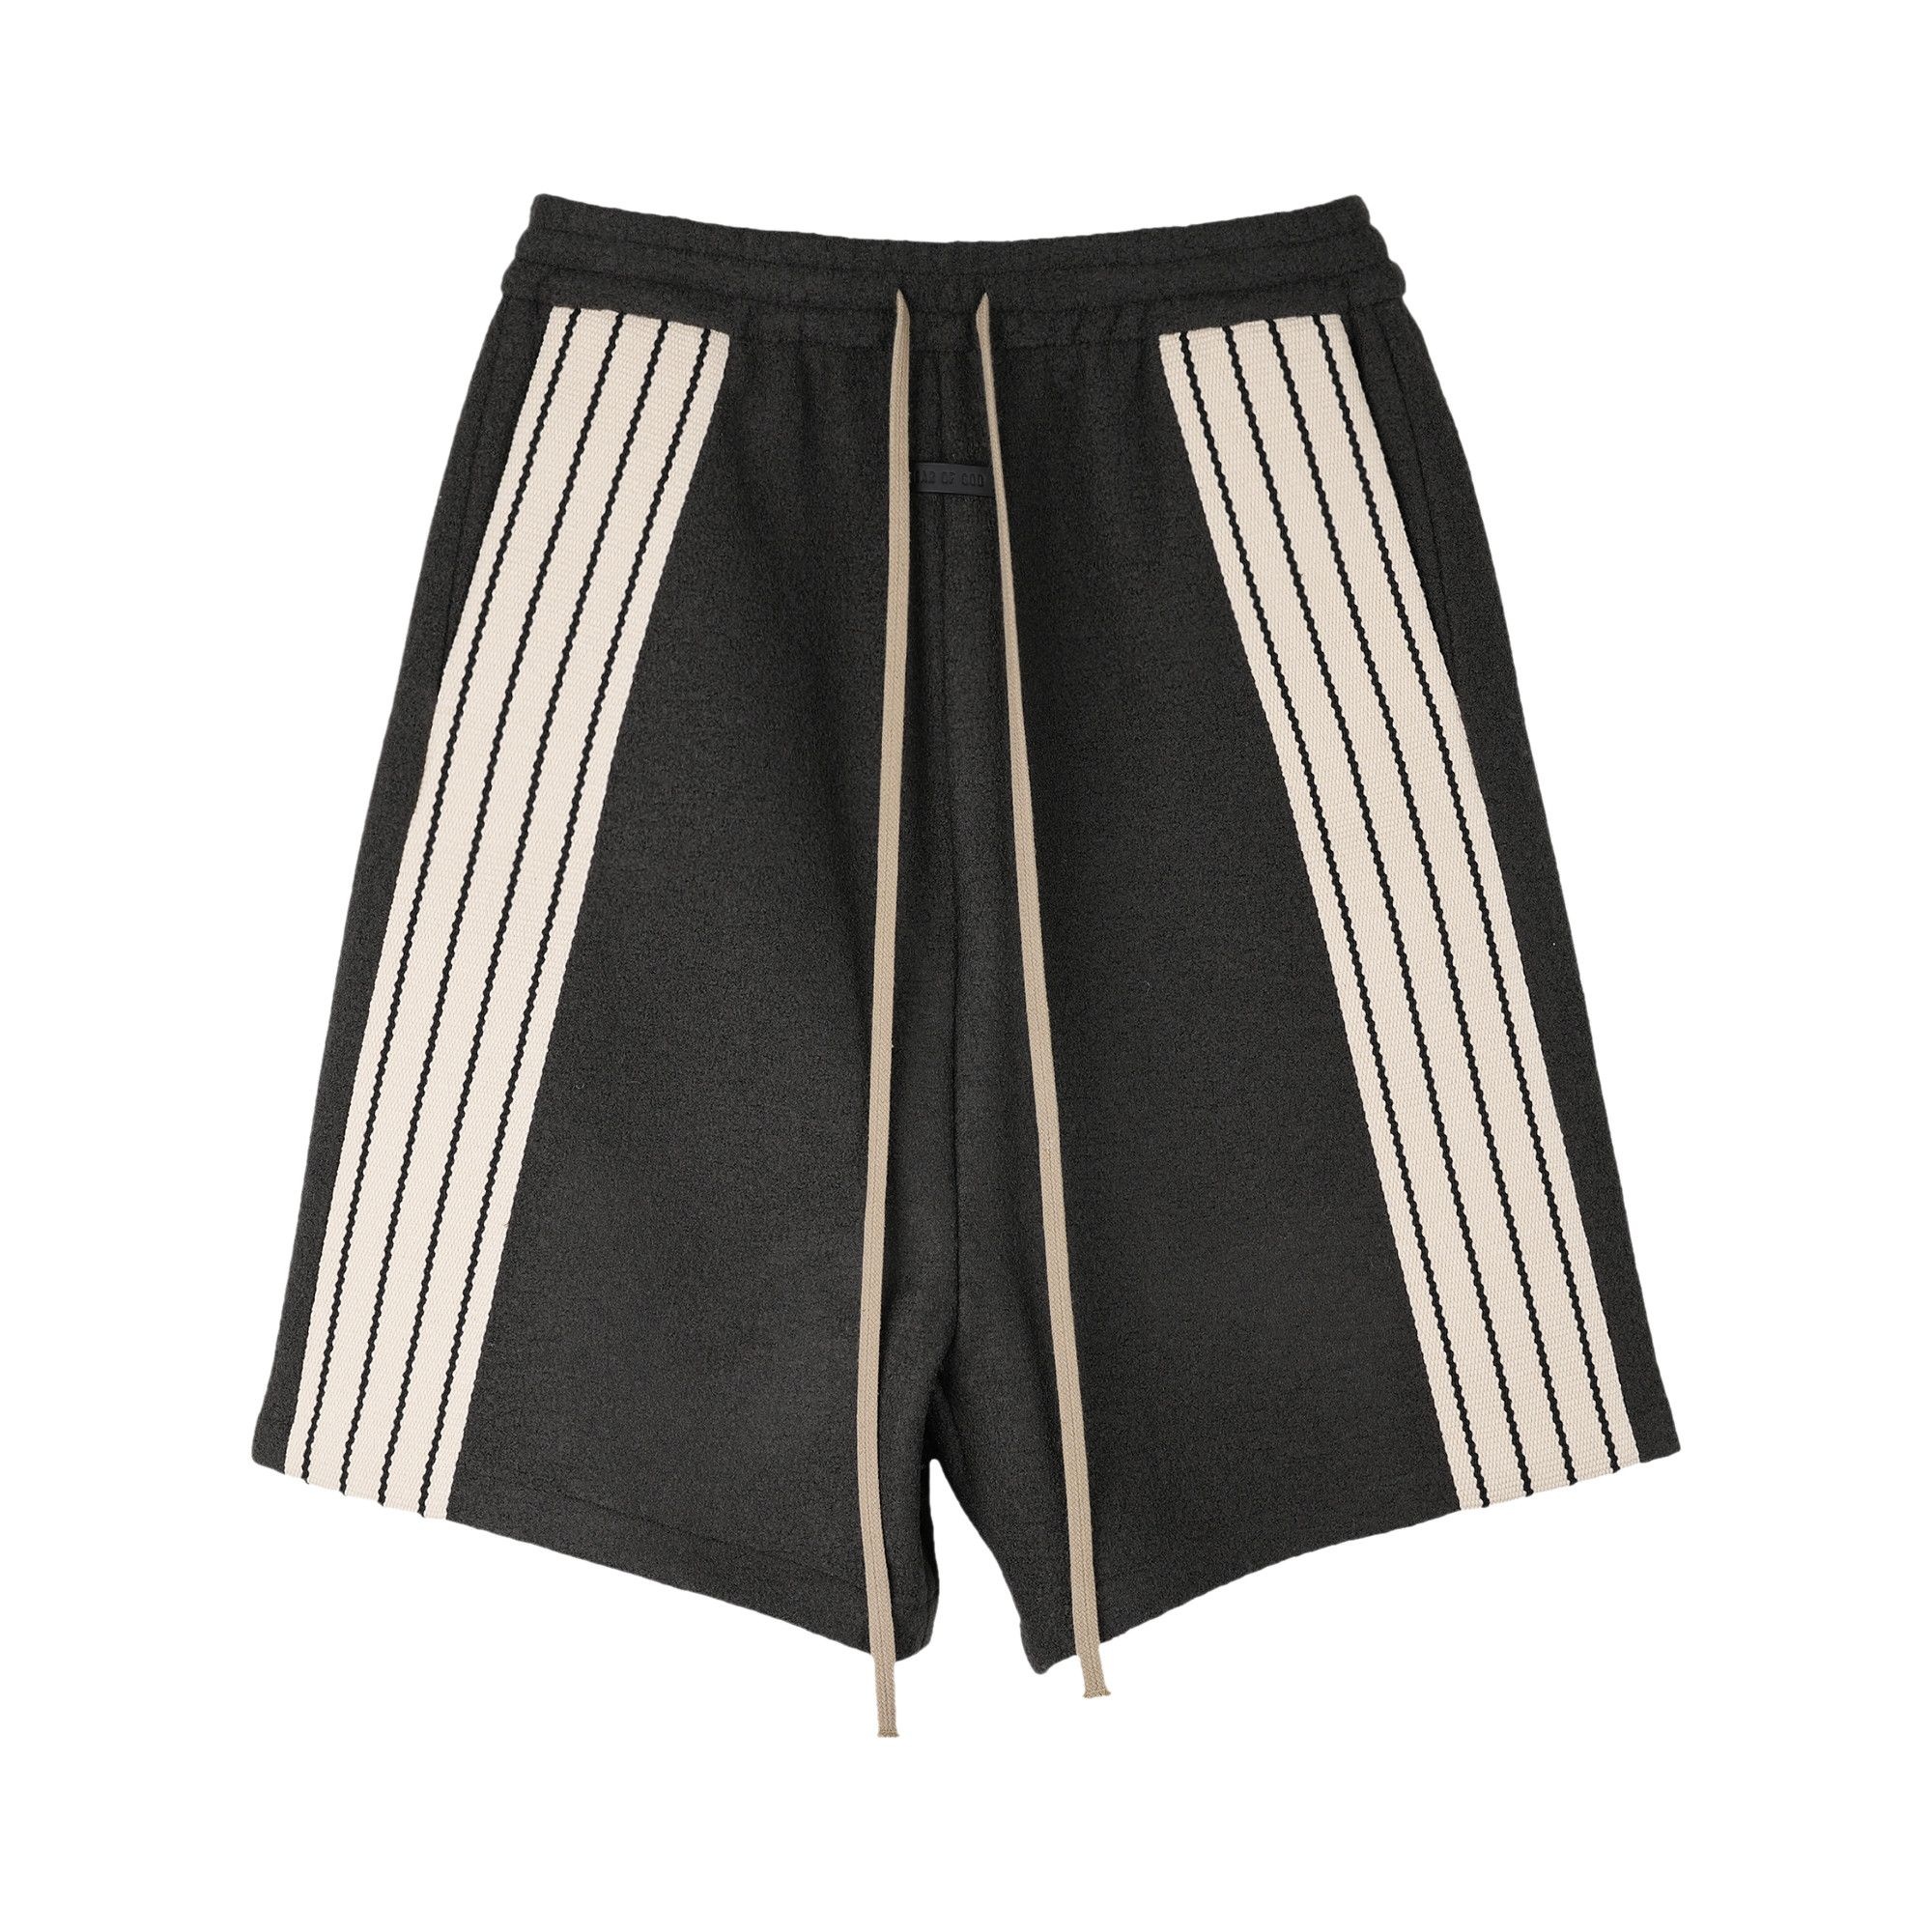 Fear of God Striped Relaxed Short 'Forest' - 1